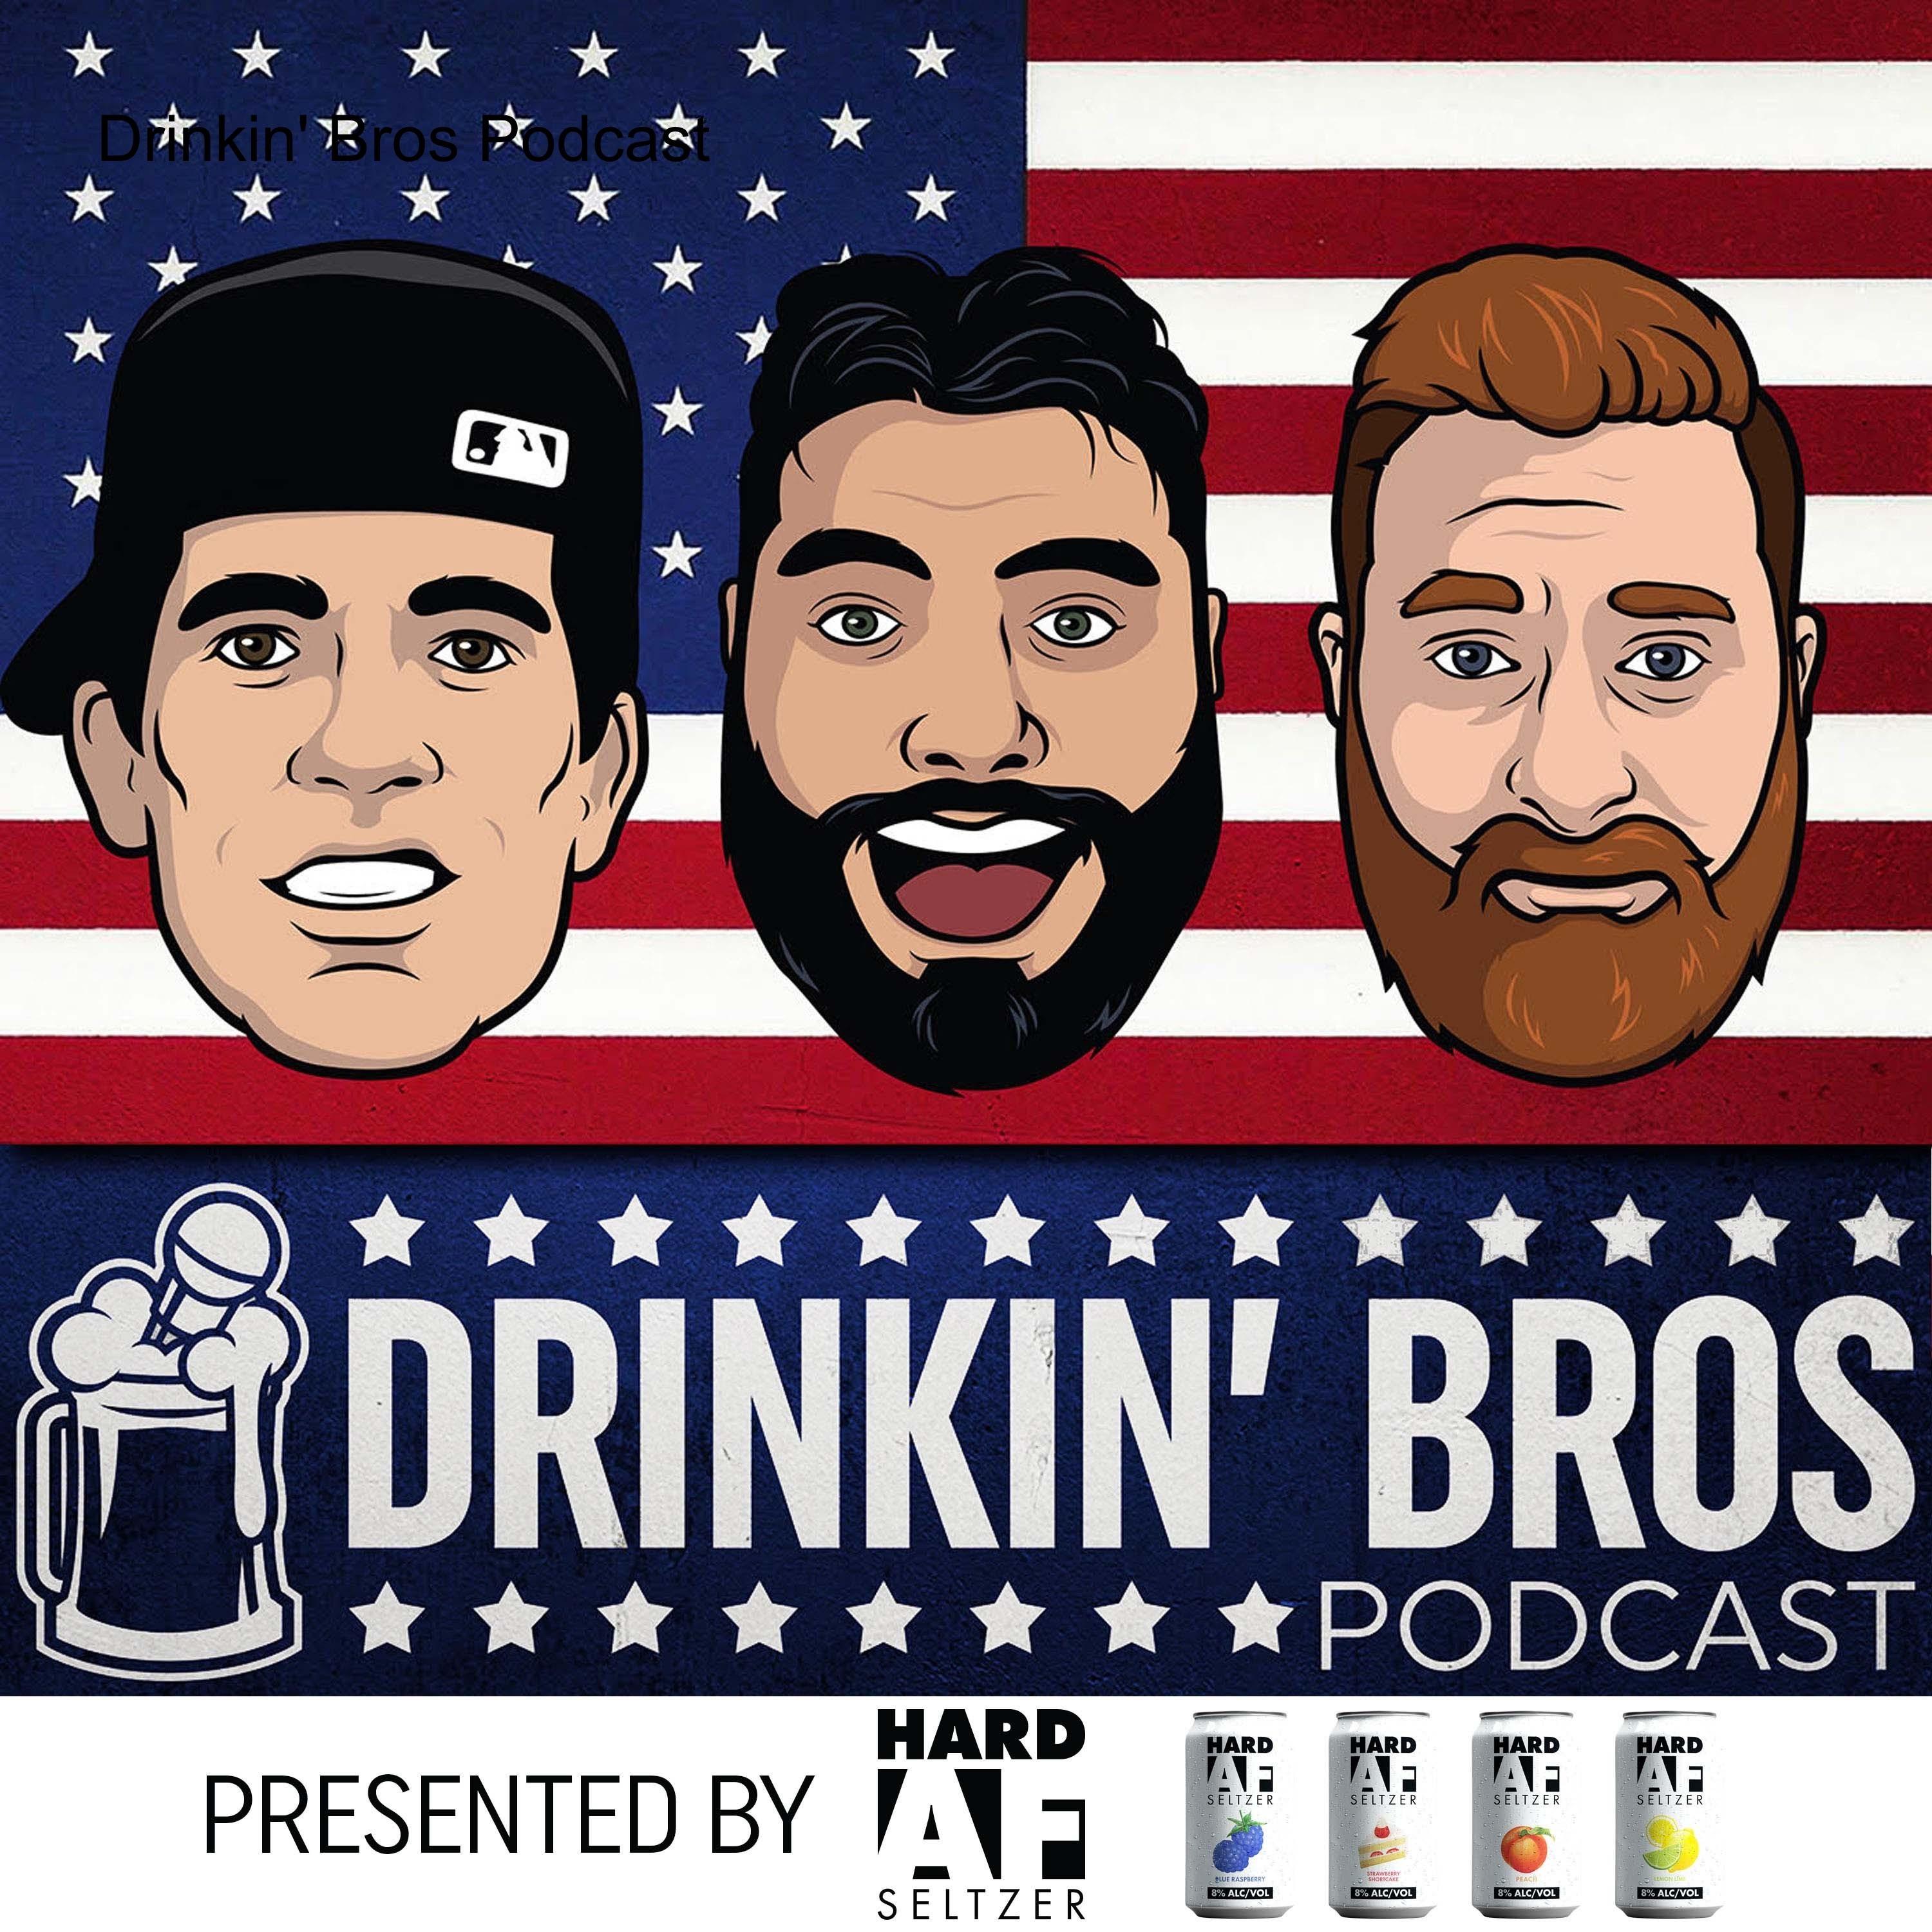 Japanese Nude Beach Blowjob - Drinkin' Bros Podcast | RedCircle